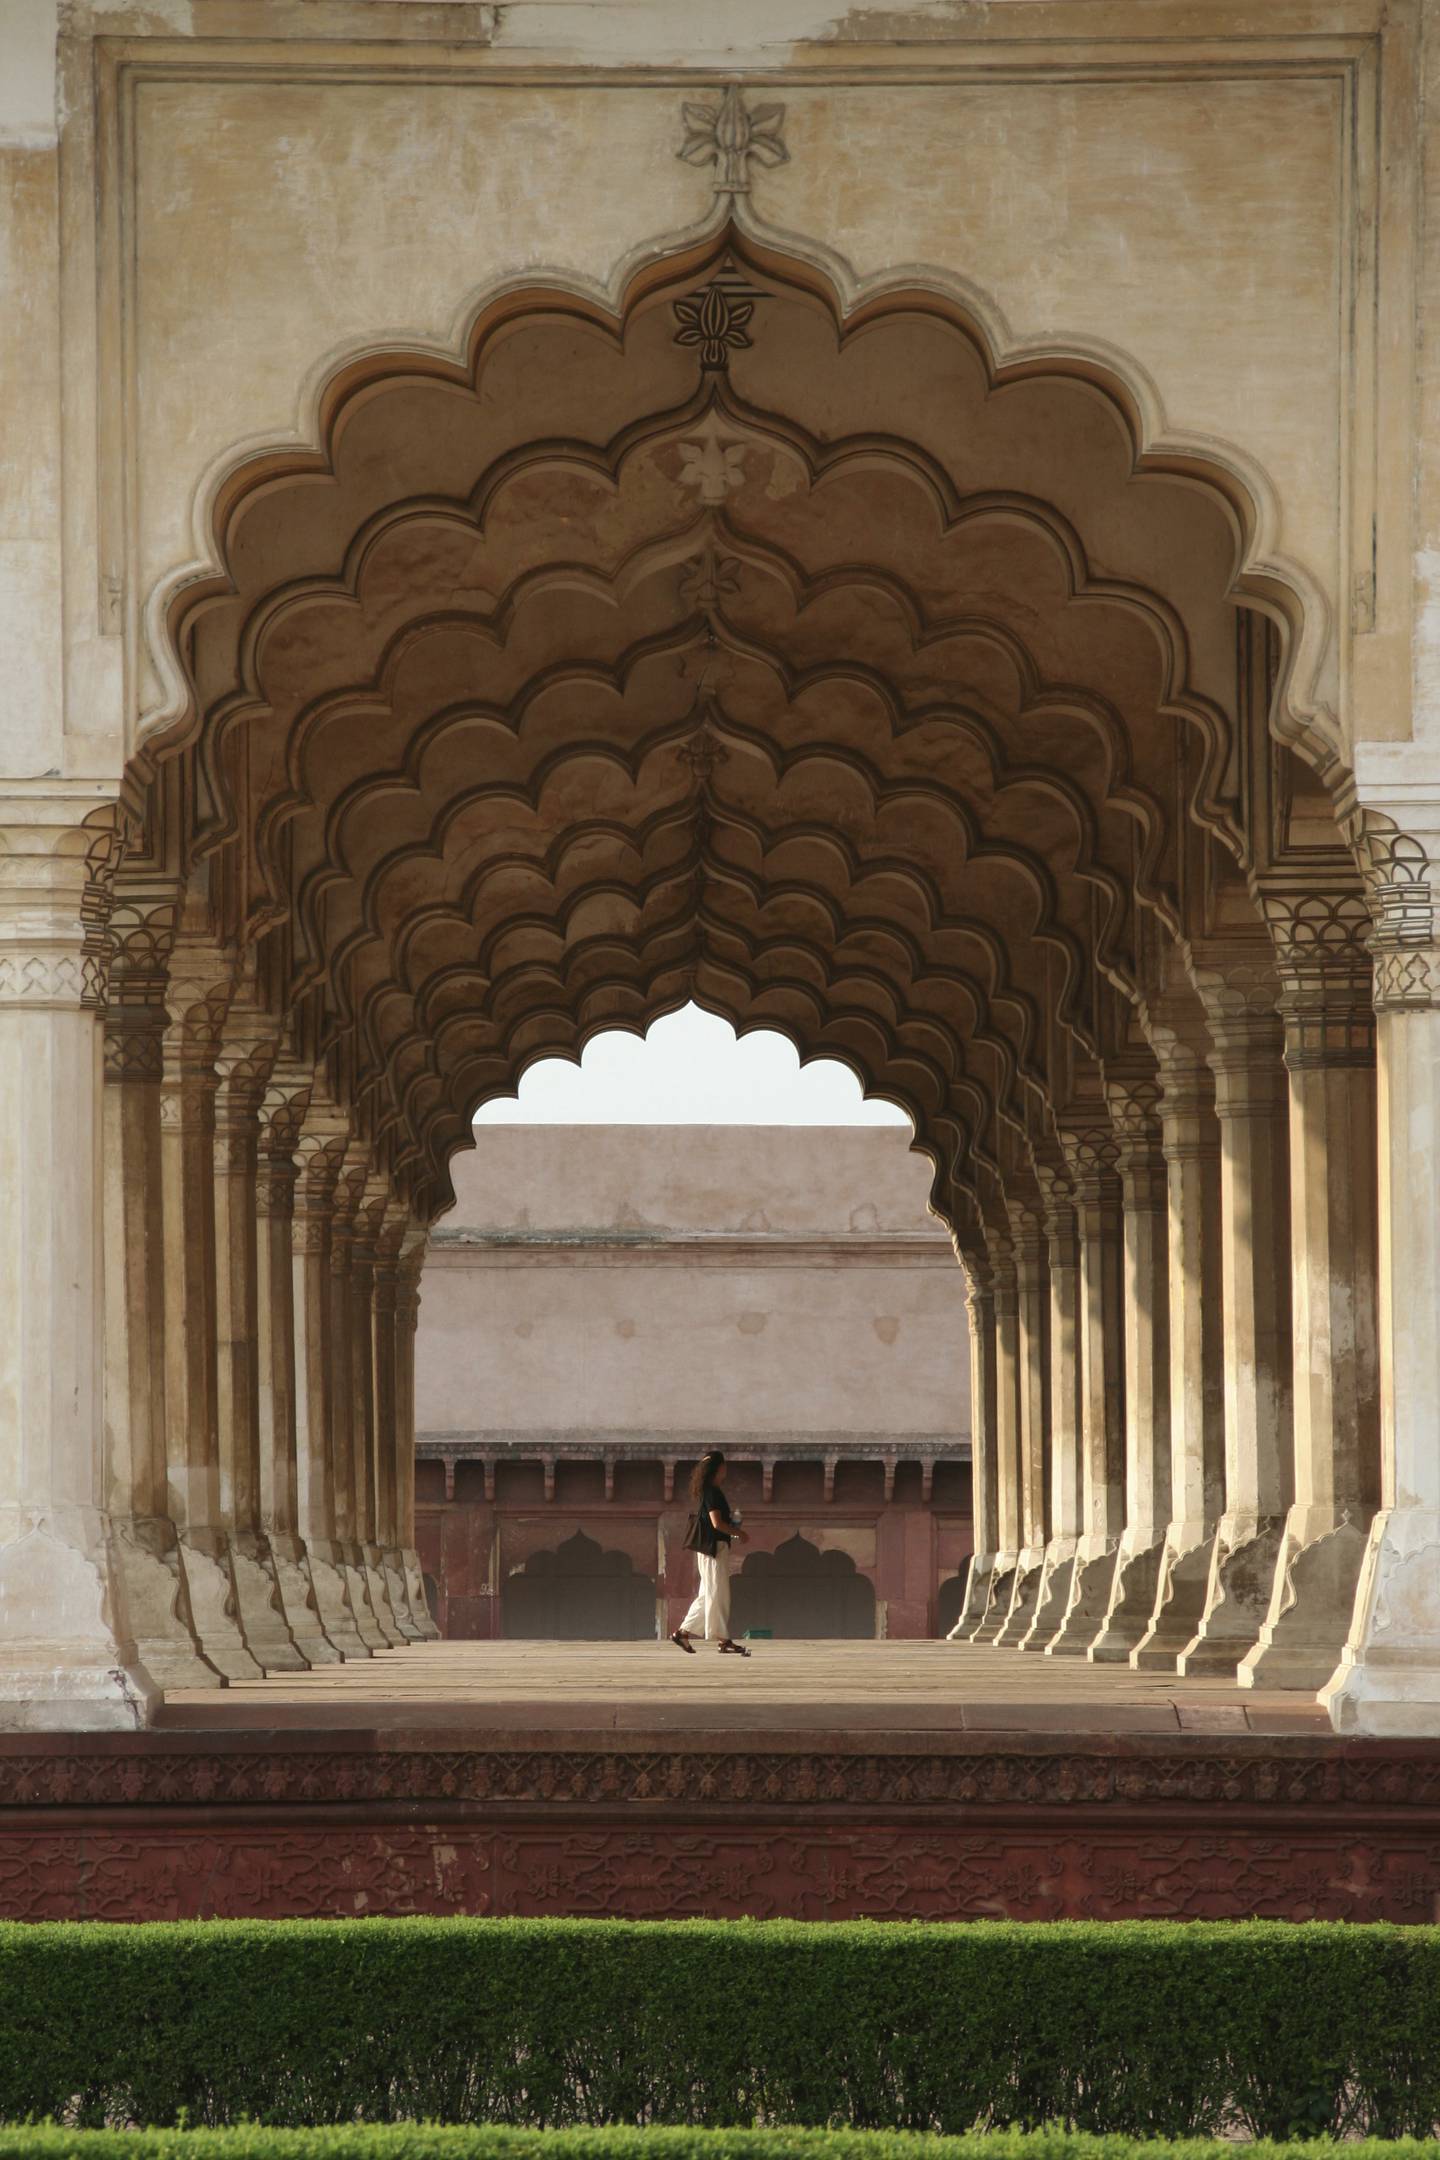 Tourist sightseeing inside the arches of Agra Fort in Agra, India (iStockphoto.com)